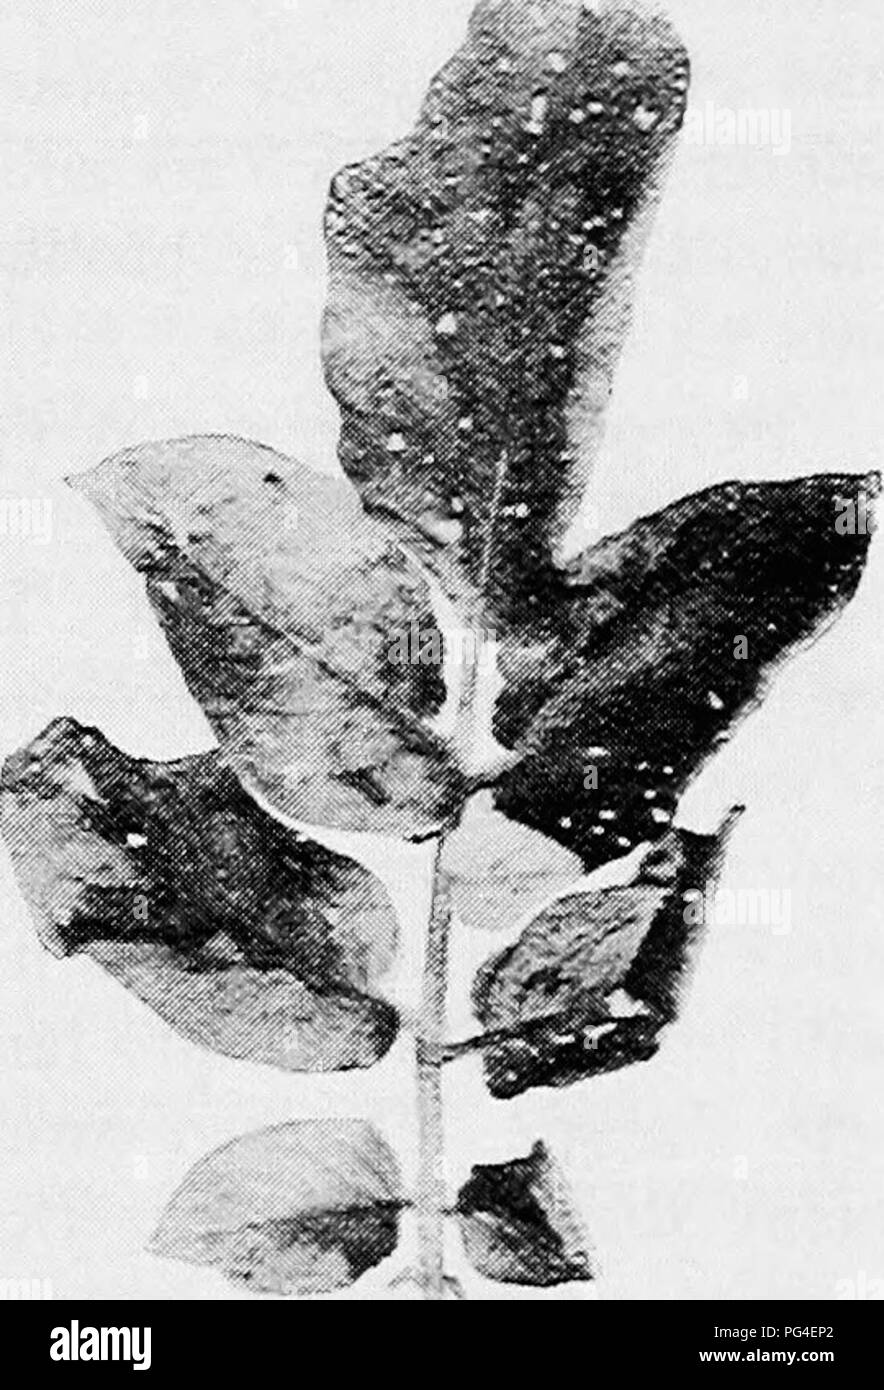 . Minnesota plant diseases. Plant diseases. Fig. 16S.—Potato blight. Early stages of the blight on the leaves. After Clinton. usually much branched, so that a miniature bush-like structure is produced and each branch terminates in a spore. These spores, as is true for most of the downy mildews, are in reality spore cases, for when placed in water they later give rise to a large number of swimming spores. When the latter come to rest they germinate into a tube which causes infection of the host plant. As far as is known at present, no winter spores are produced. The mycelium, however, is capabl Stock Photo